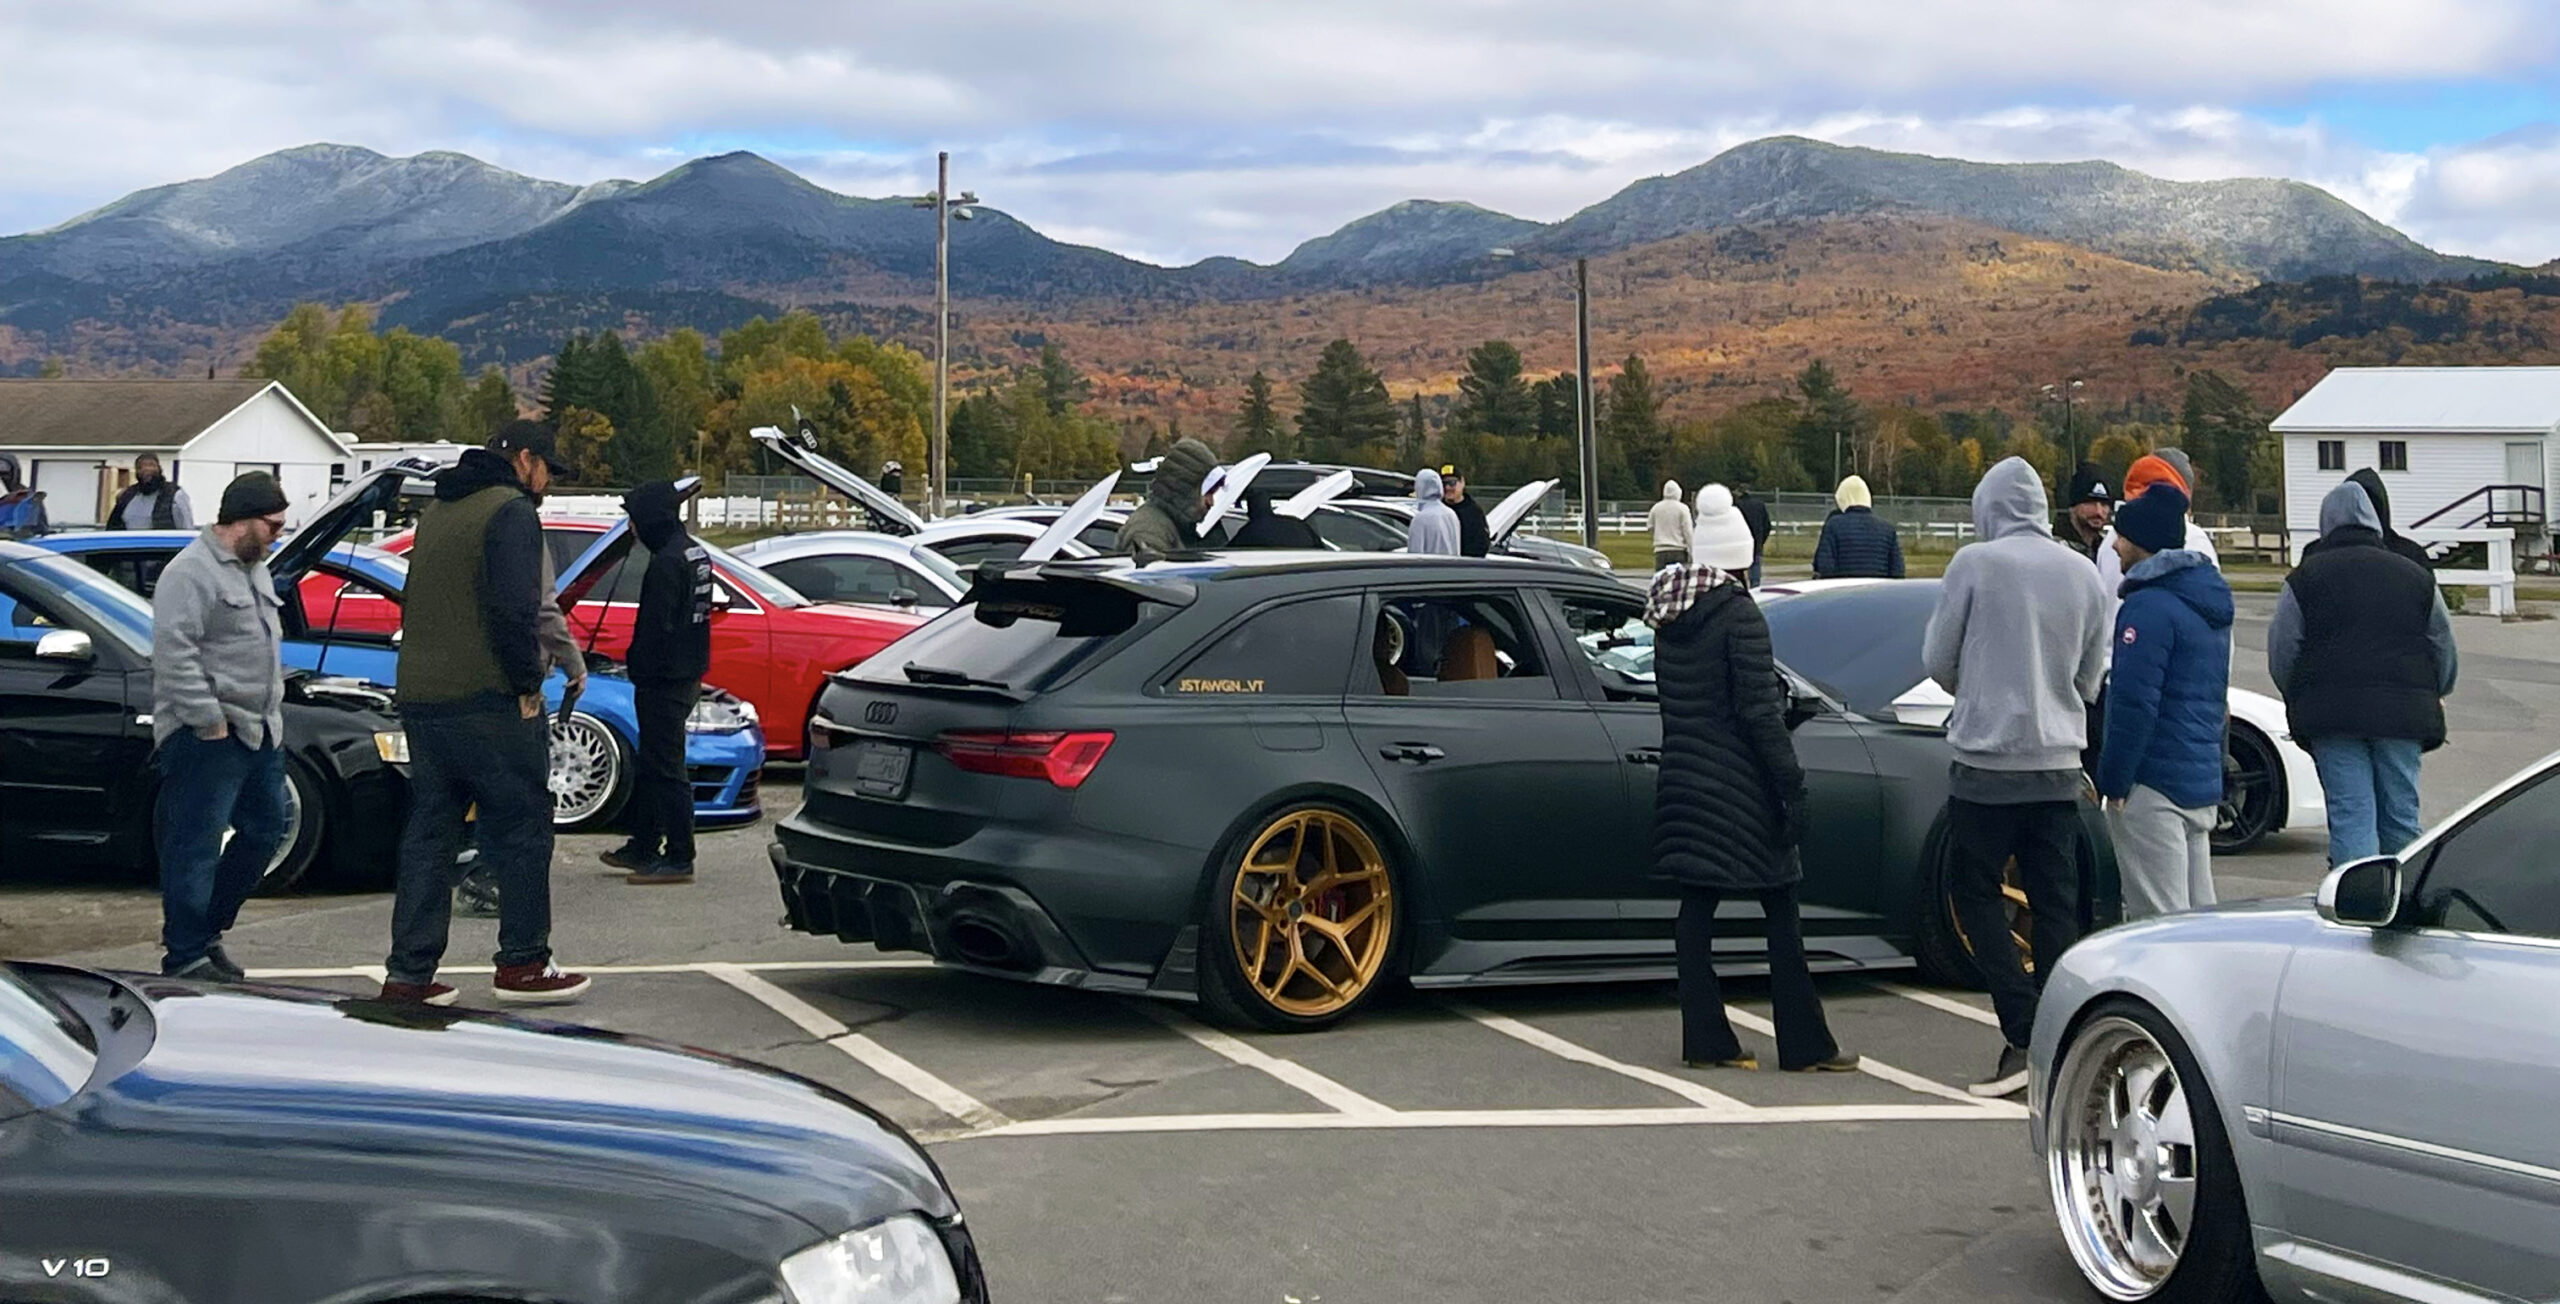 Vermont Car Shows & New England Car Shows for 2023 Travel Like a